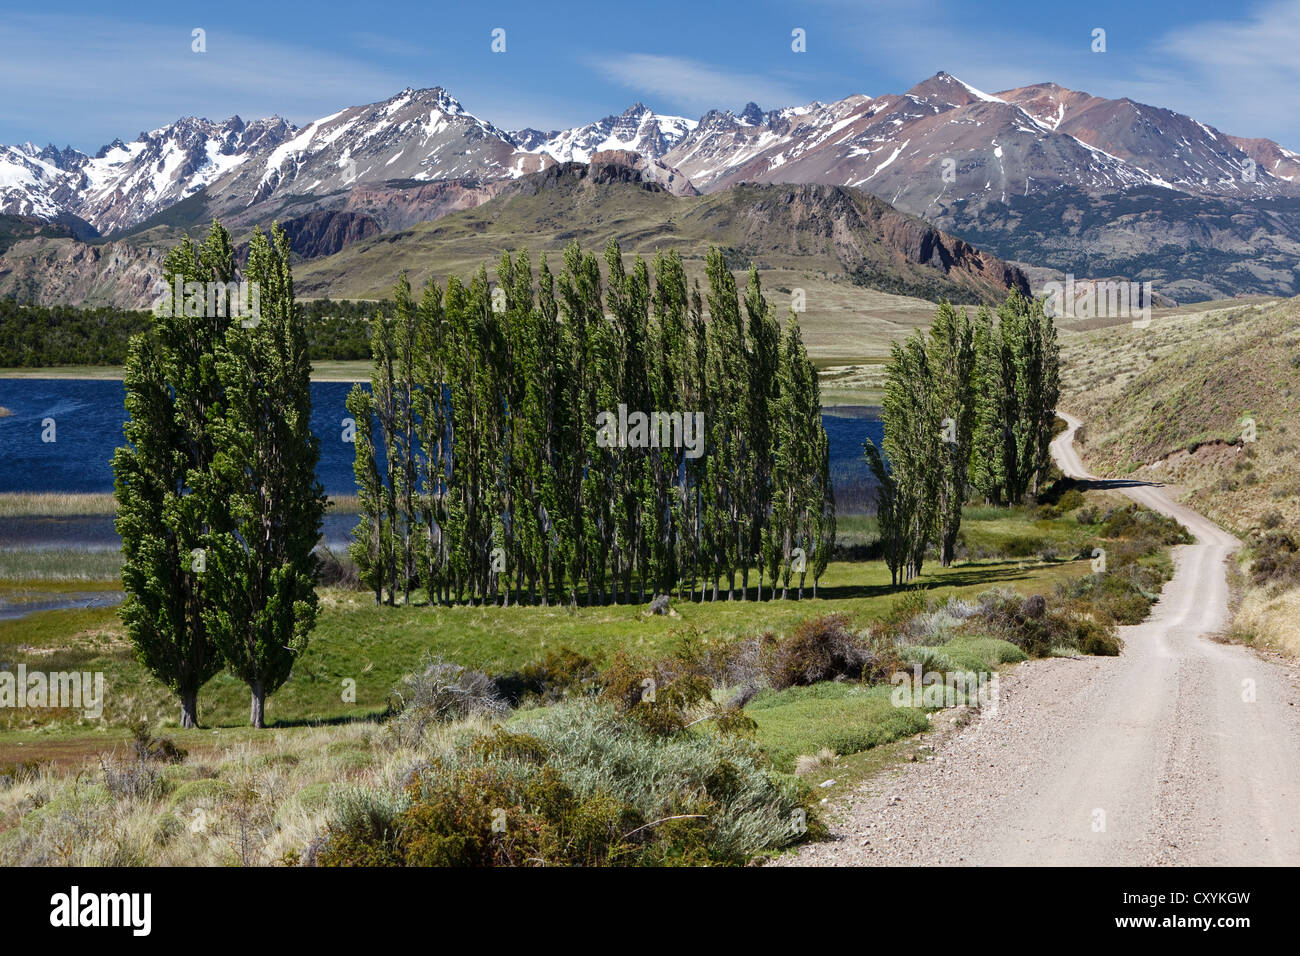 Poplars, the Chilean Andes at the back, on the Rio Chacabuco river, Cochrane, Region de Aysen, Patagonia, Chile, South America Stock Photo